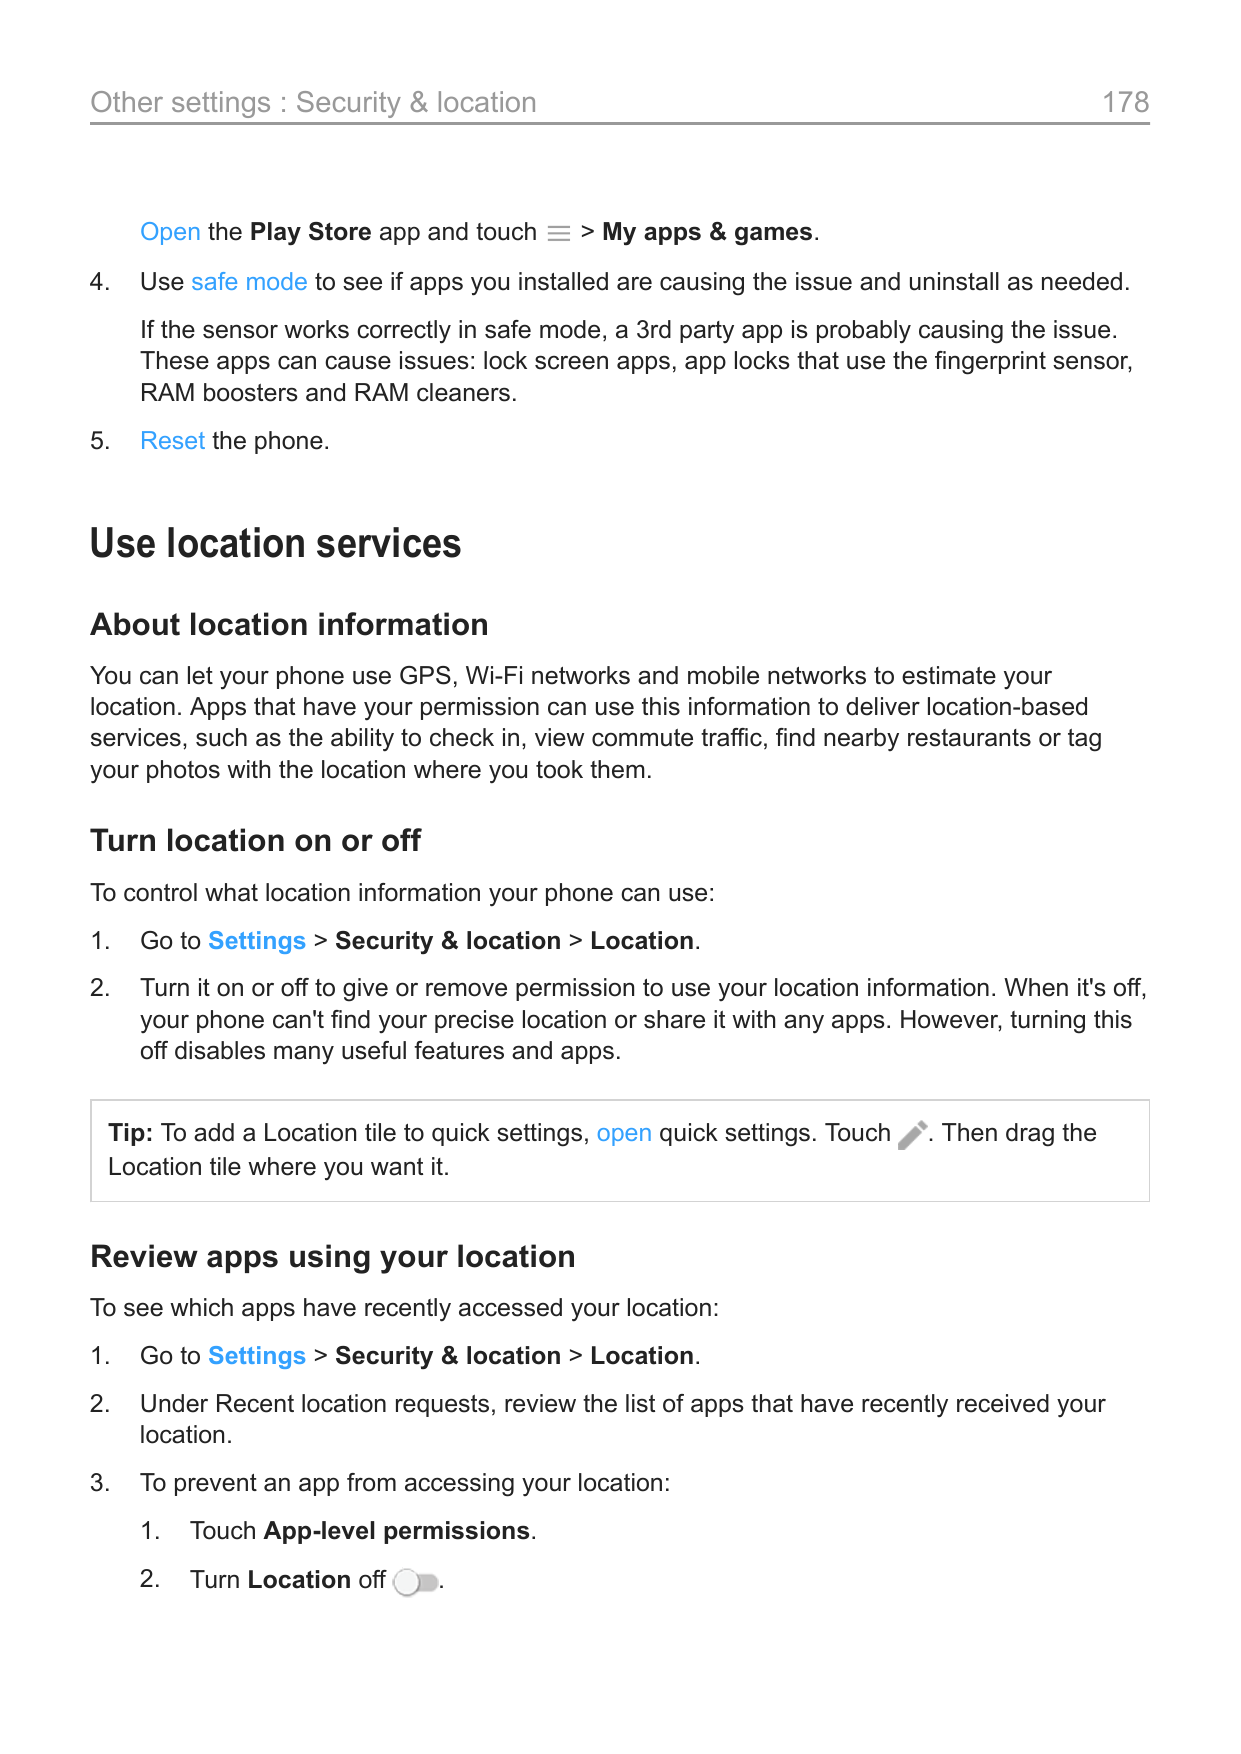 Other settings : Security & locationOpen the Play Store app and touch4.178> My apps & games.Use safe mode to see if apps you ins